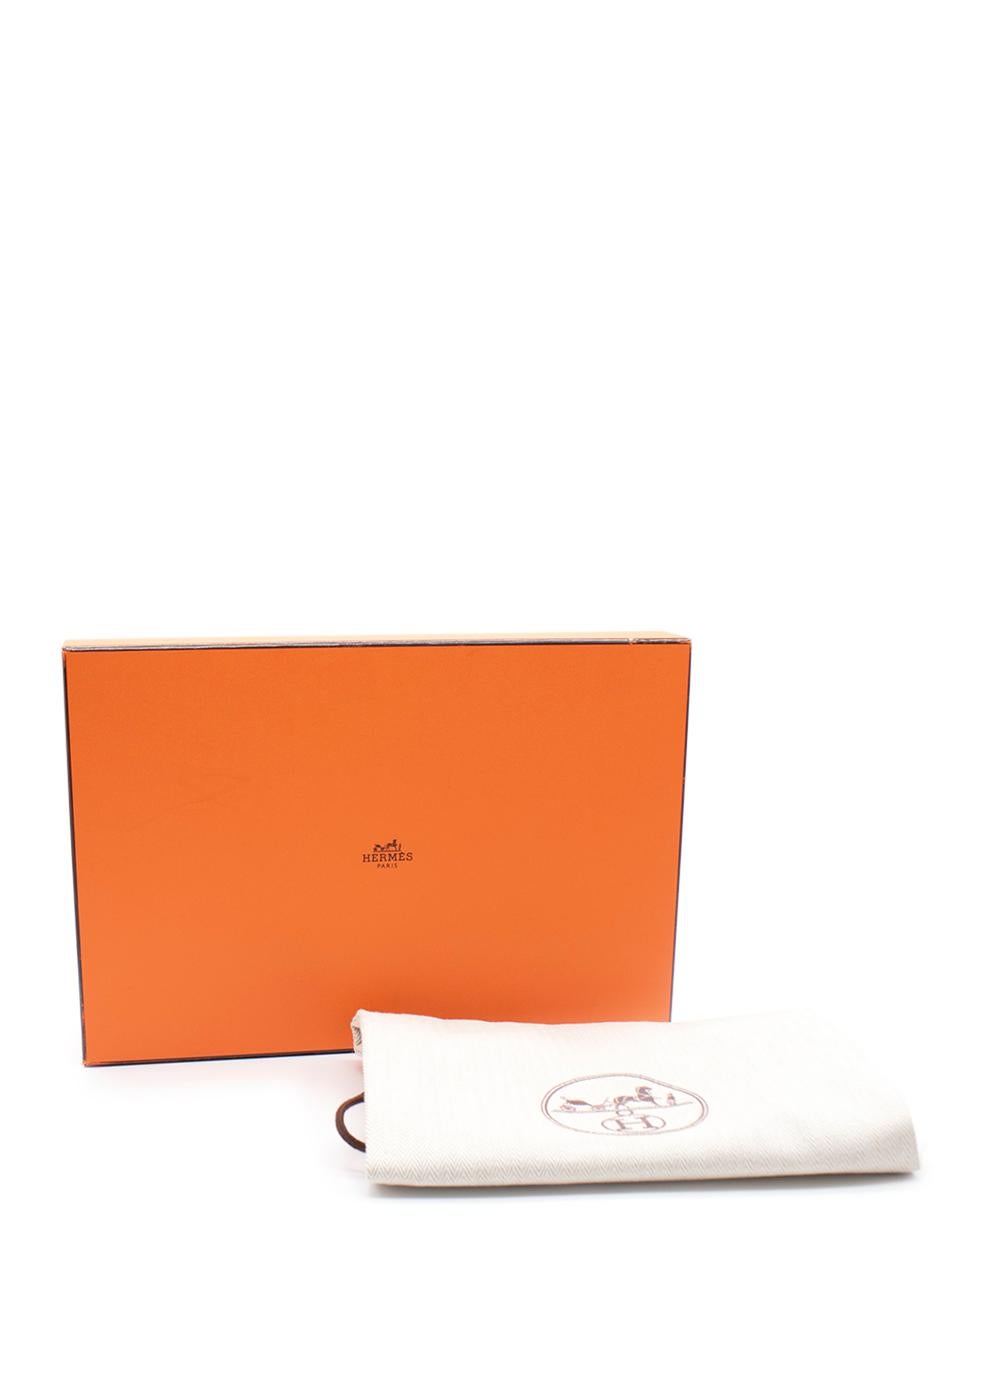 Hermes Orange Calfskin Leather Chypre Sandals

- Iconic sandal with 'H' cut-out leather strap and adjustable velcro strap
- Deep leather-lined footbed 
- Rubber sole with H embossed tread

Materials
Rubber
Leather

Made in Italy